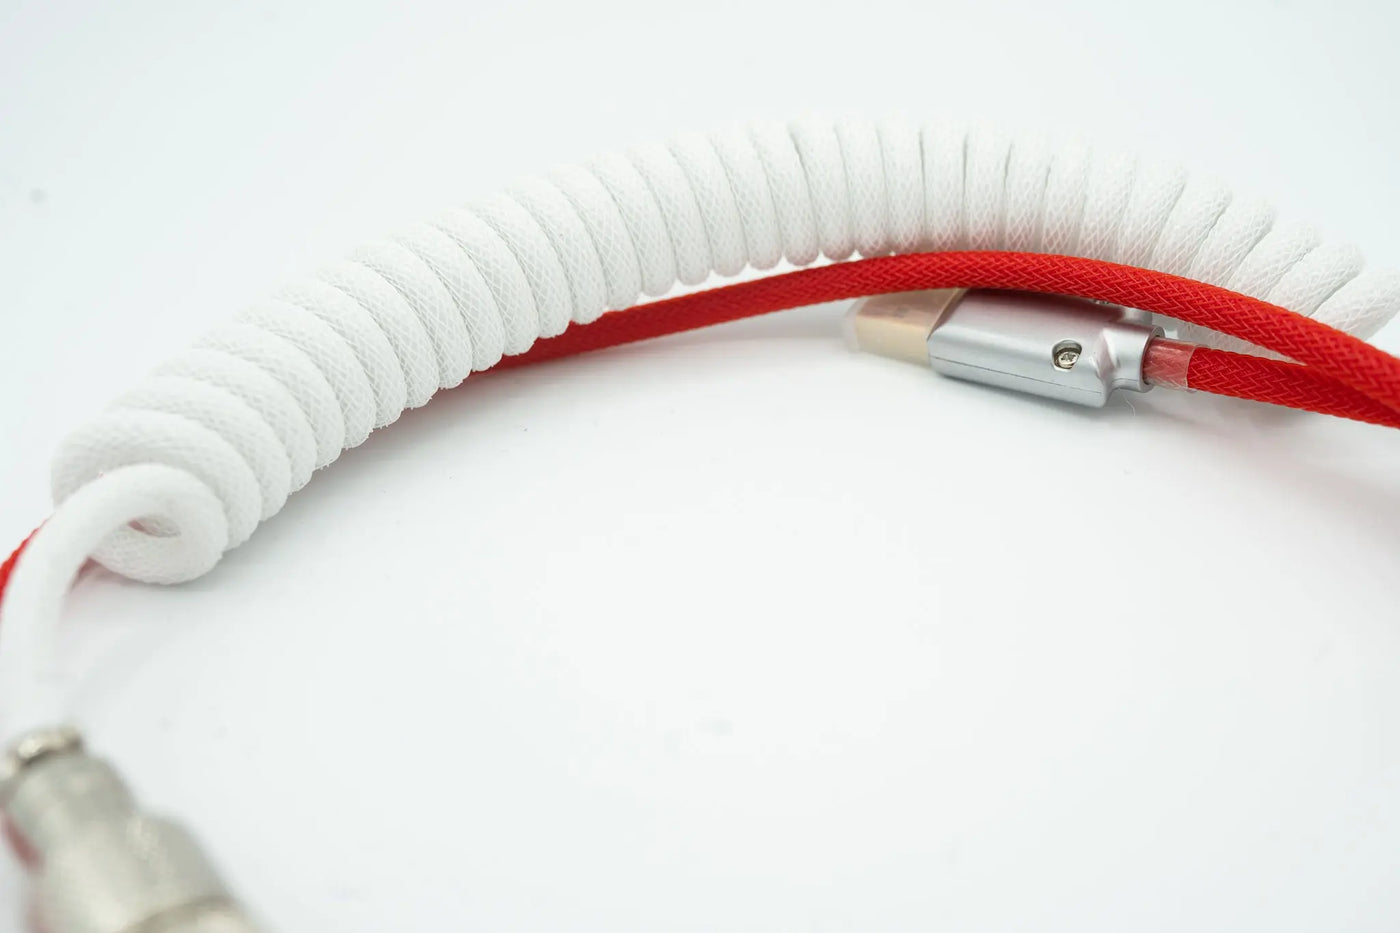 Red and White Light up Custom Coiled Type C USB Cable for Keyboard Vyral